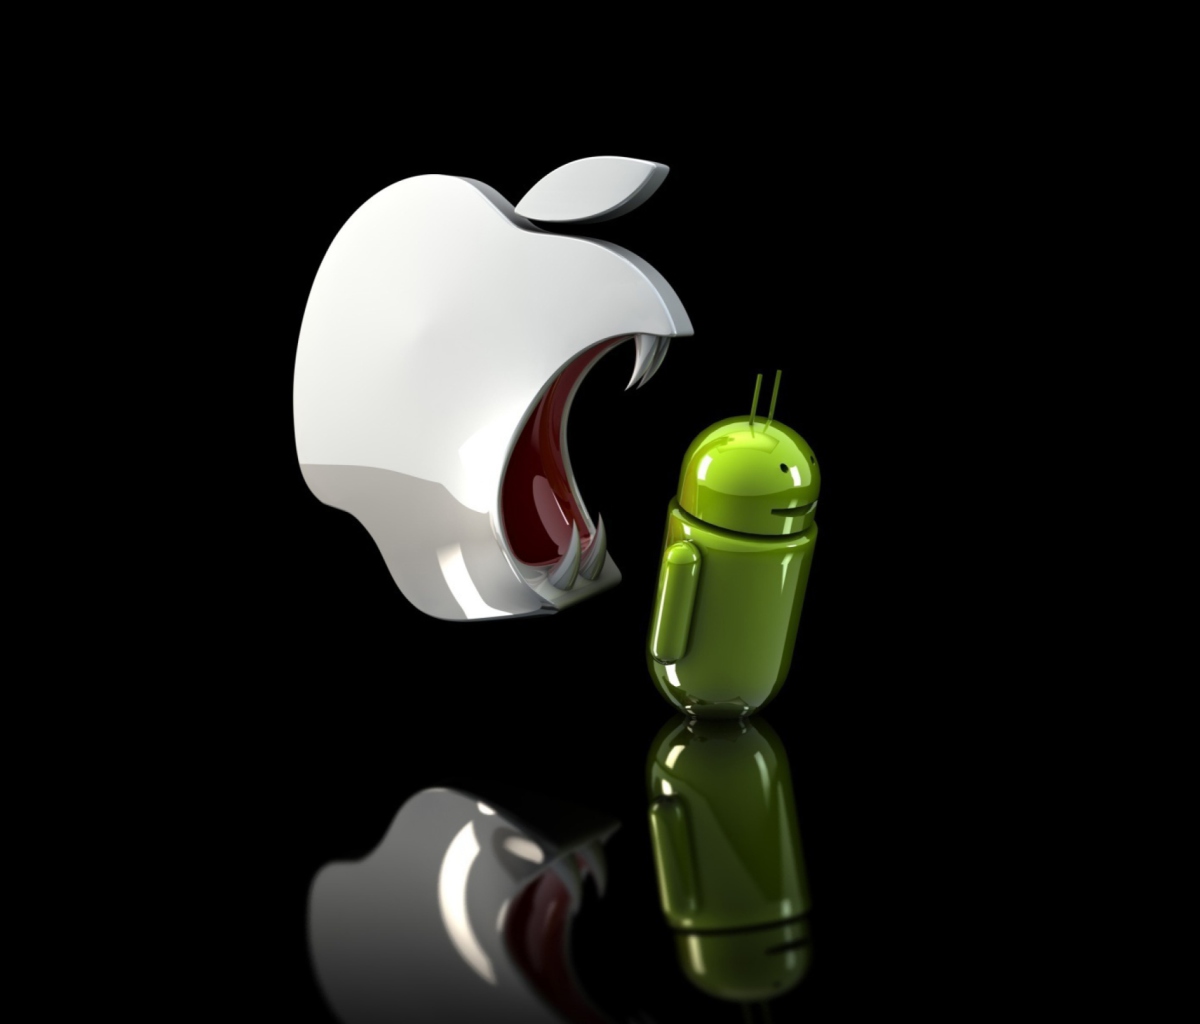 Apple Against Android wallpaper 1200x1024